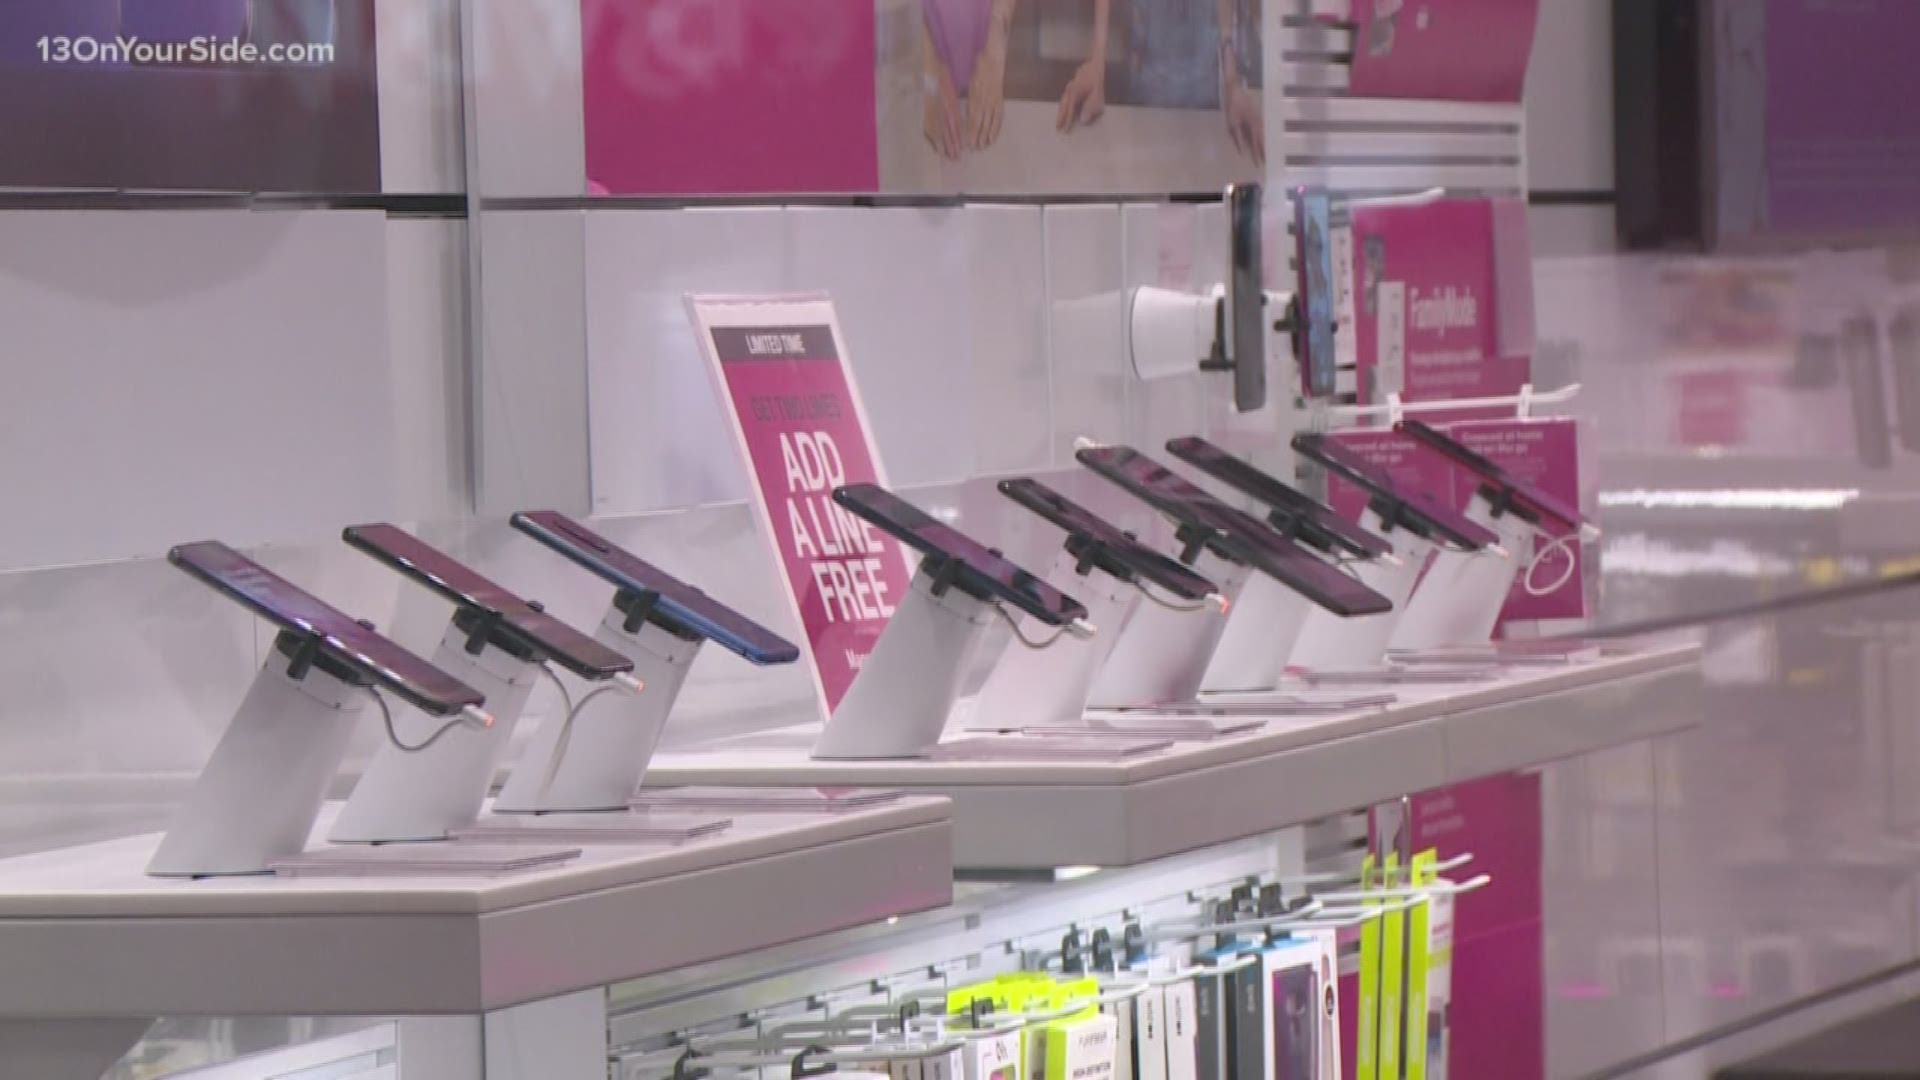 Authorities in Kent County are investigating a couple more cell phone store break-ins Monday morning, adding to a rash of incidents plaguing Kent and Ottawa counties in recent weeks.